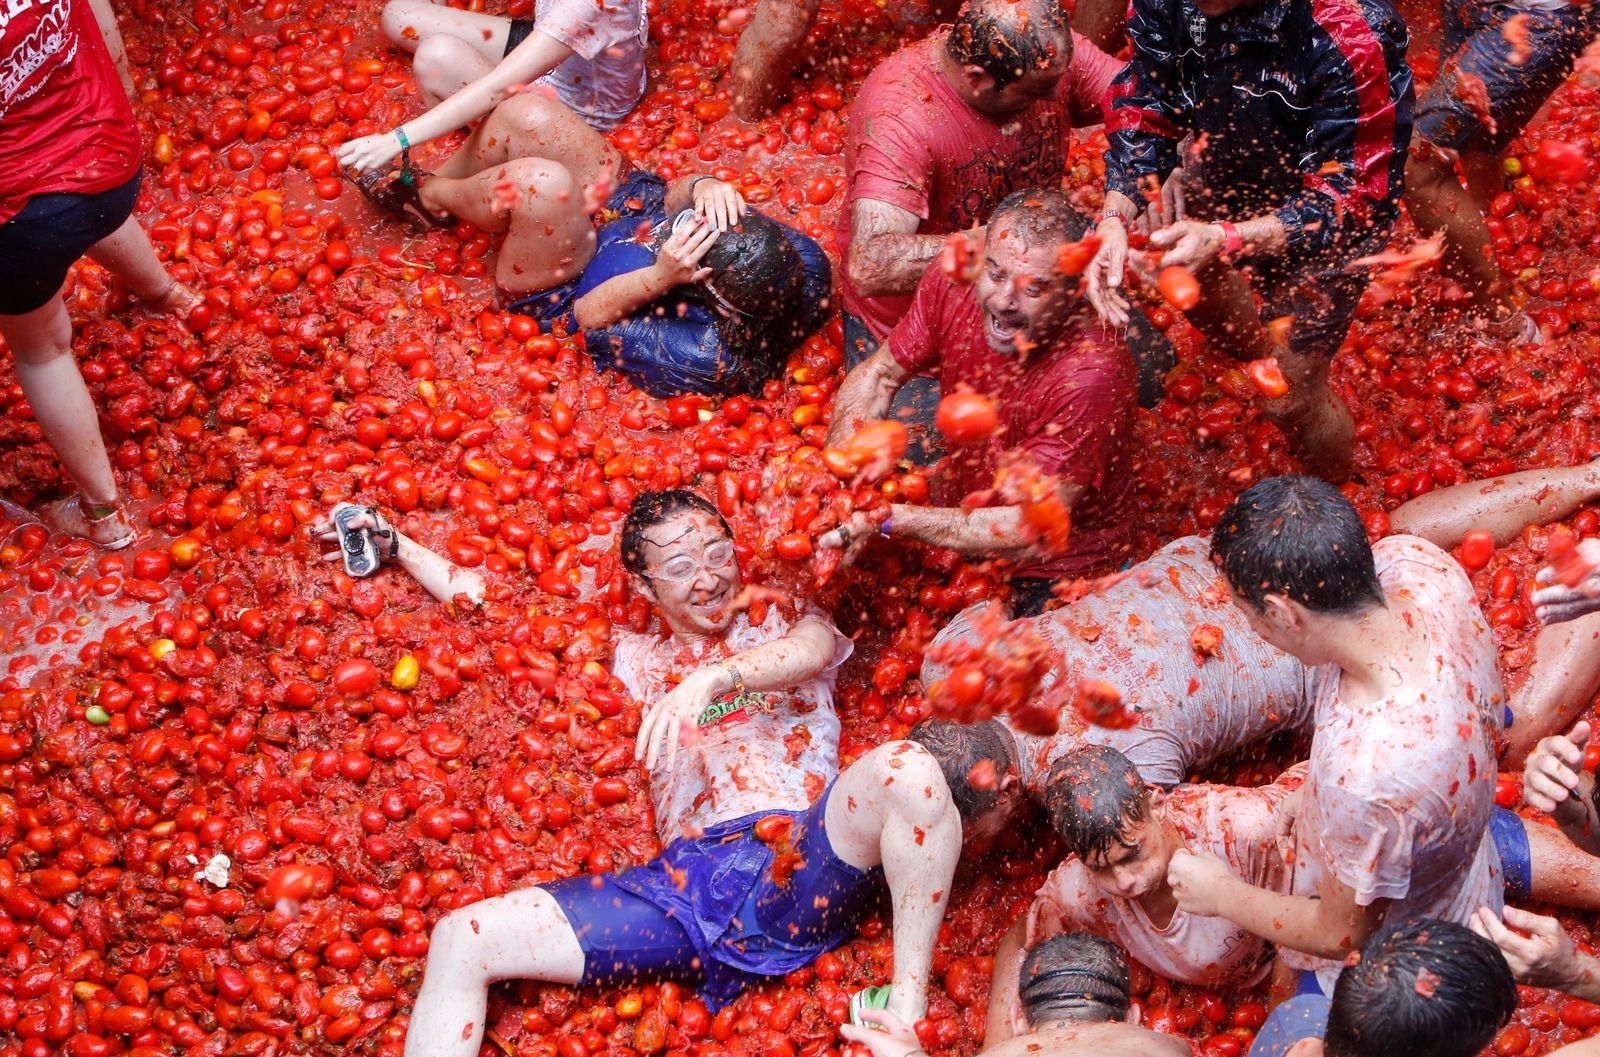 Revelers enjoy as they throw tomatoes at each other, during the annual "Tomatina", tomato fight fiesta, in the village of Bunol, 50 kilometers outside Valencia, Spain, Wednesday, Aug. 30, 2017. At the annual "Tomatina" battle, that has become a major tourist attraction, trucks dumped 160 tons of tomatoes for some 20,000 participants, many from abroad, to throw during the hour-long Wednesday morning festivities. (AP Photo/Alberto Saiz)